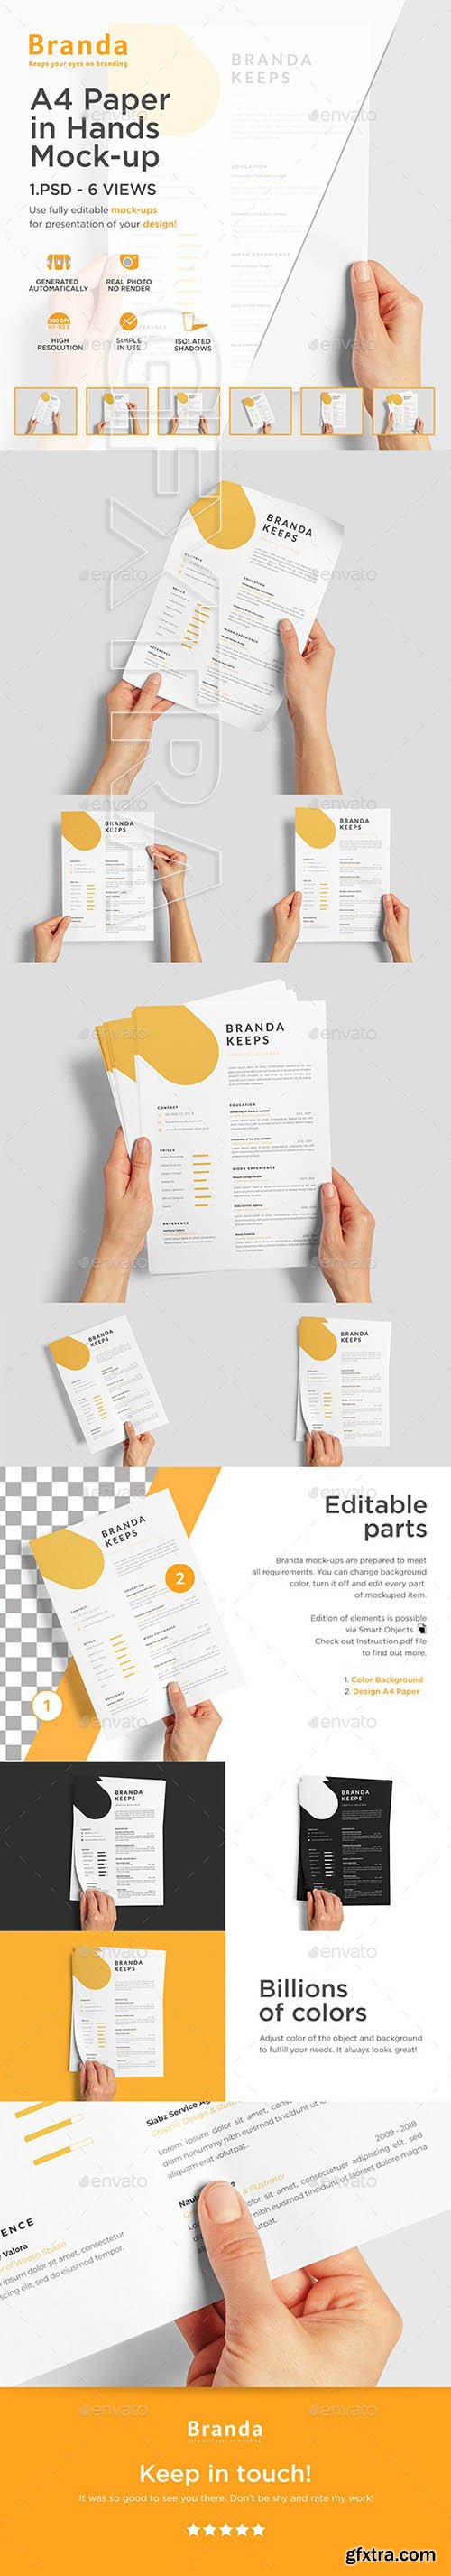 GraphicRiver - A4 Paper in Hands Mock-up 25818233